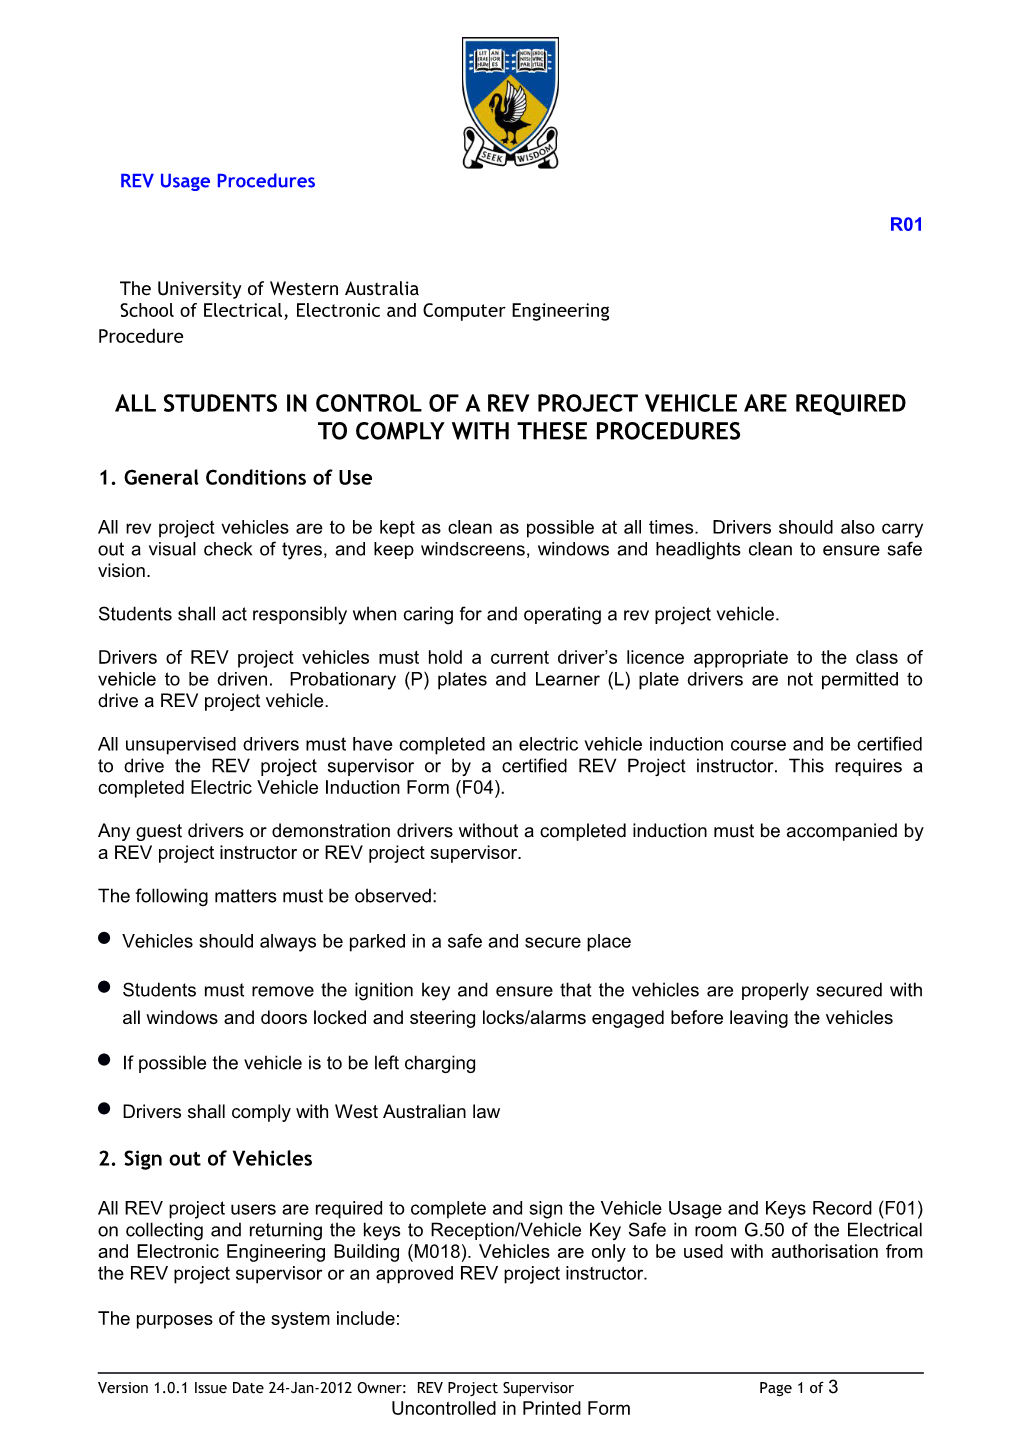 All Students in Control of a Rev Project Vehicle Are Required to Comply with These Procedures